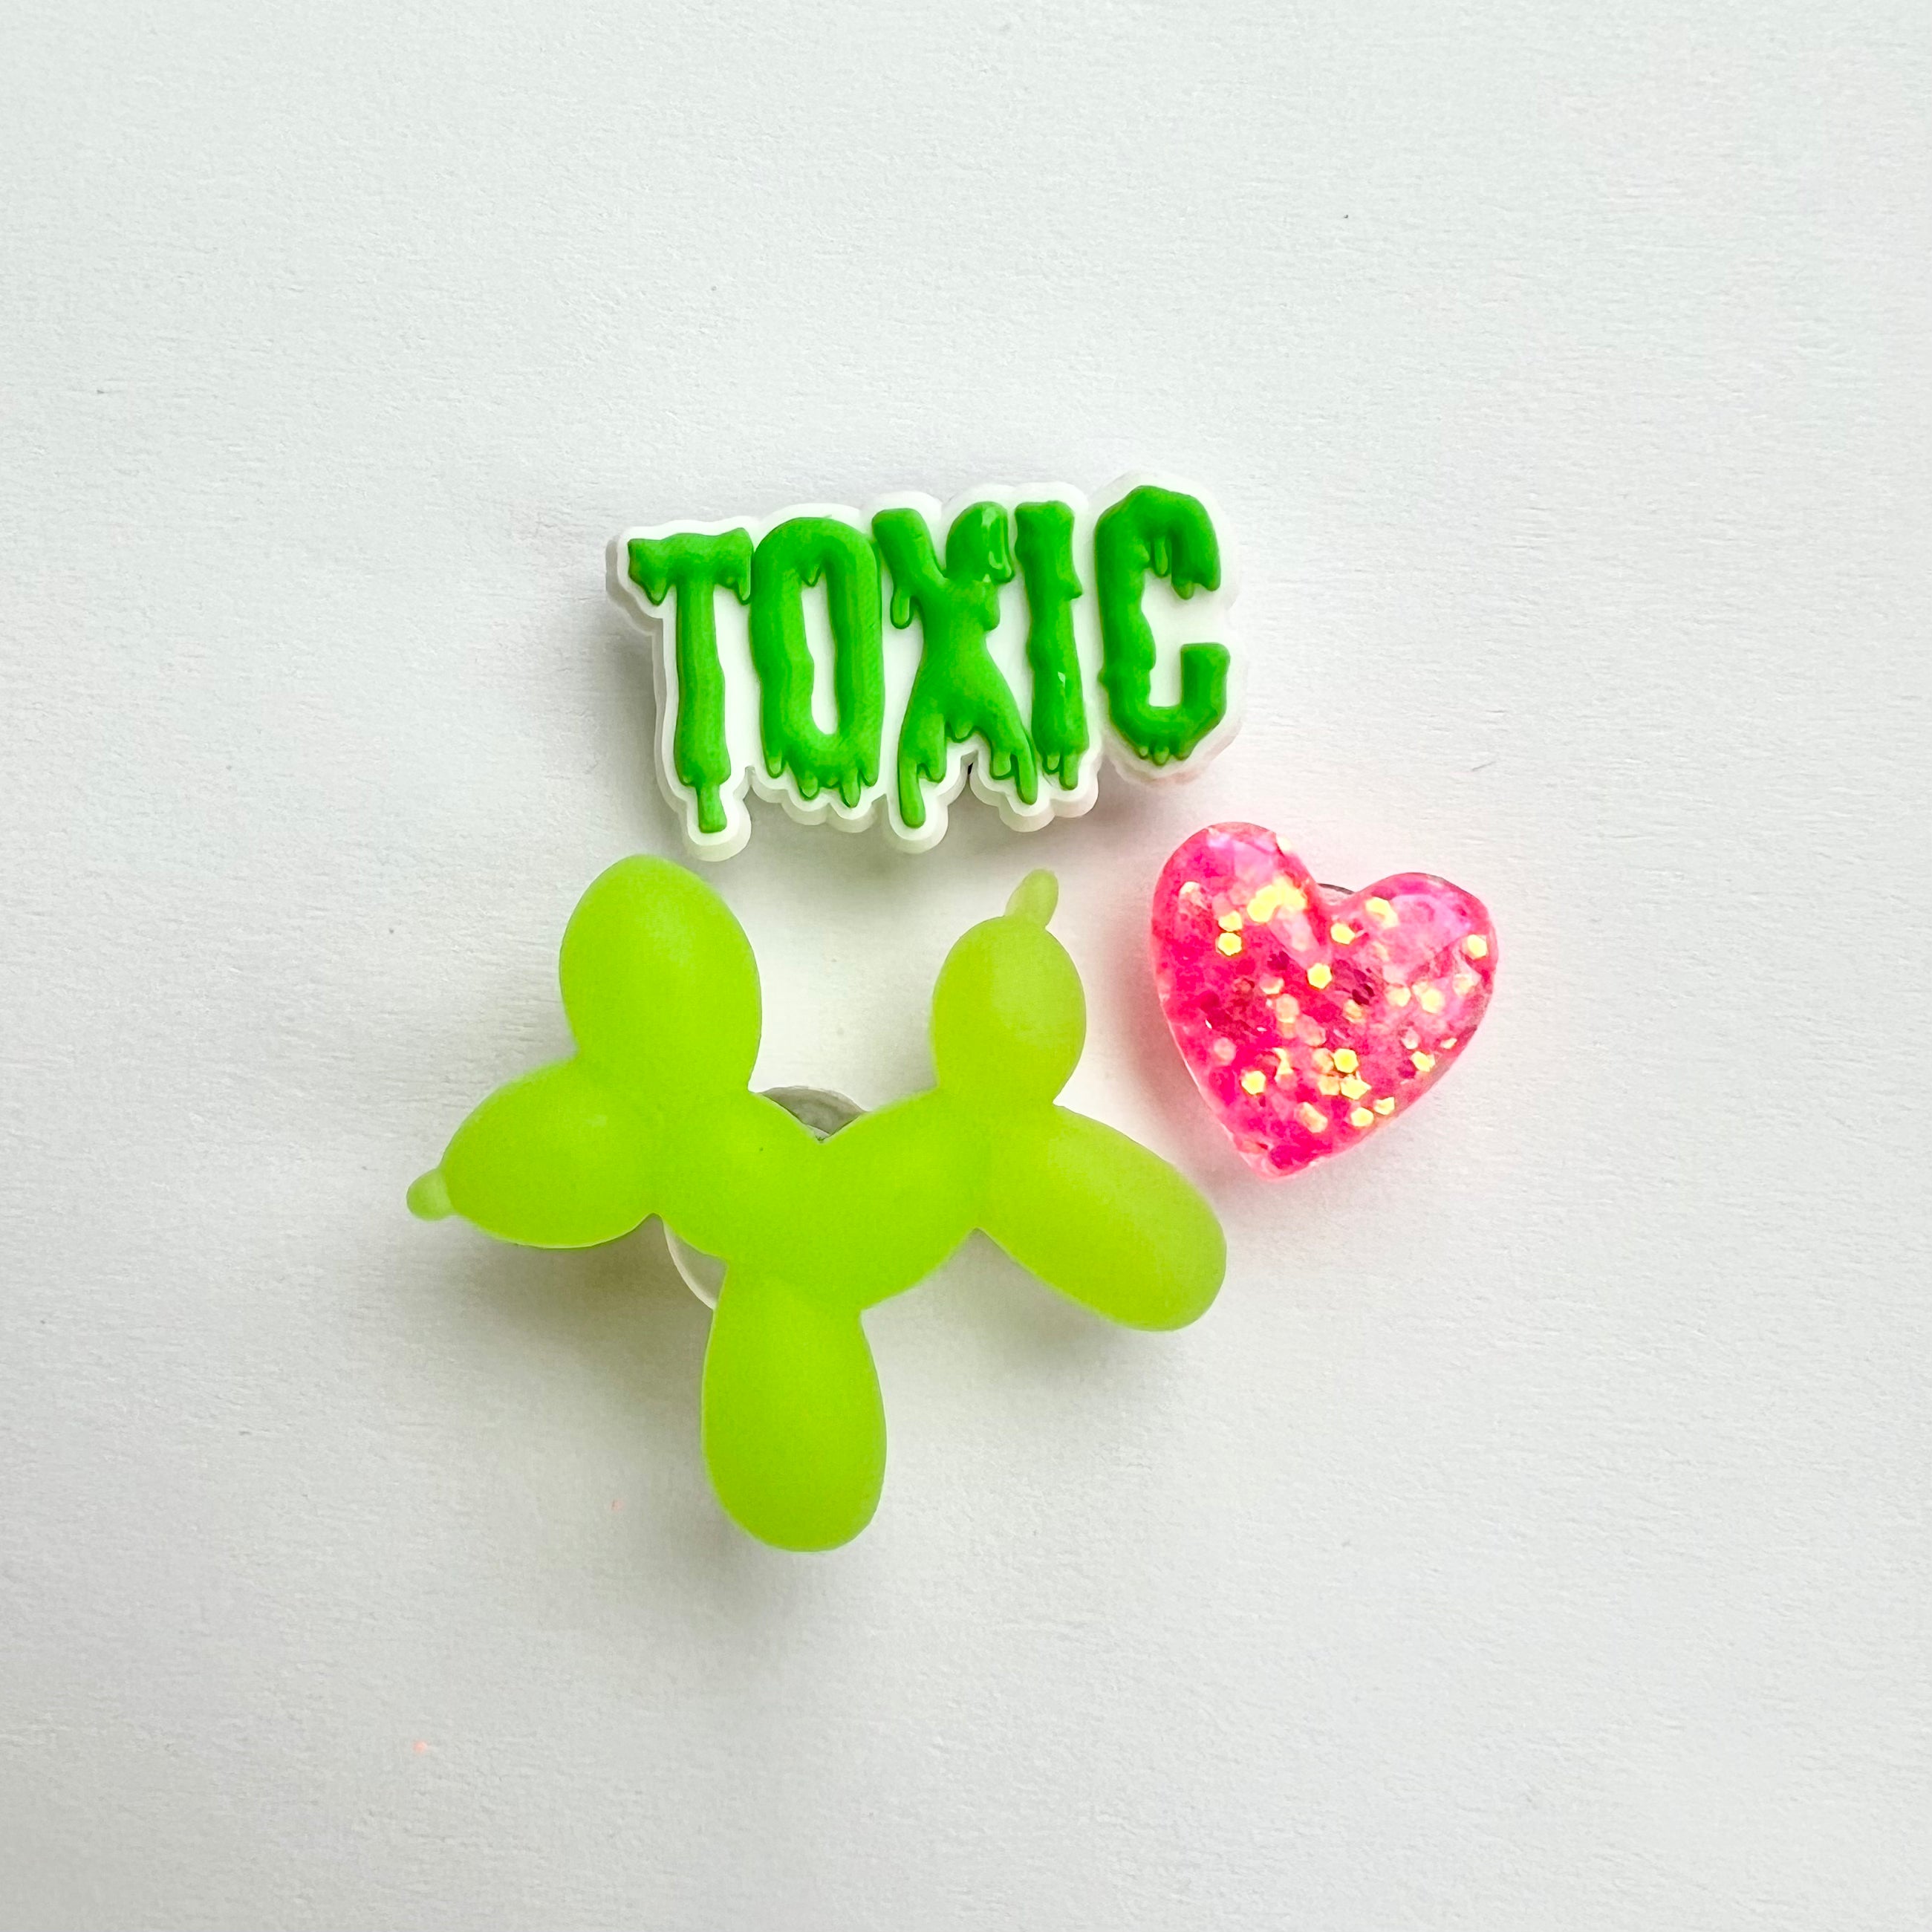 The Toxic Charms Pack